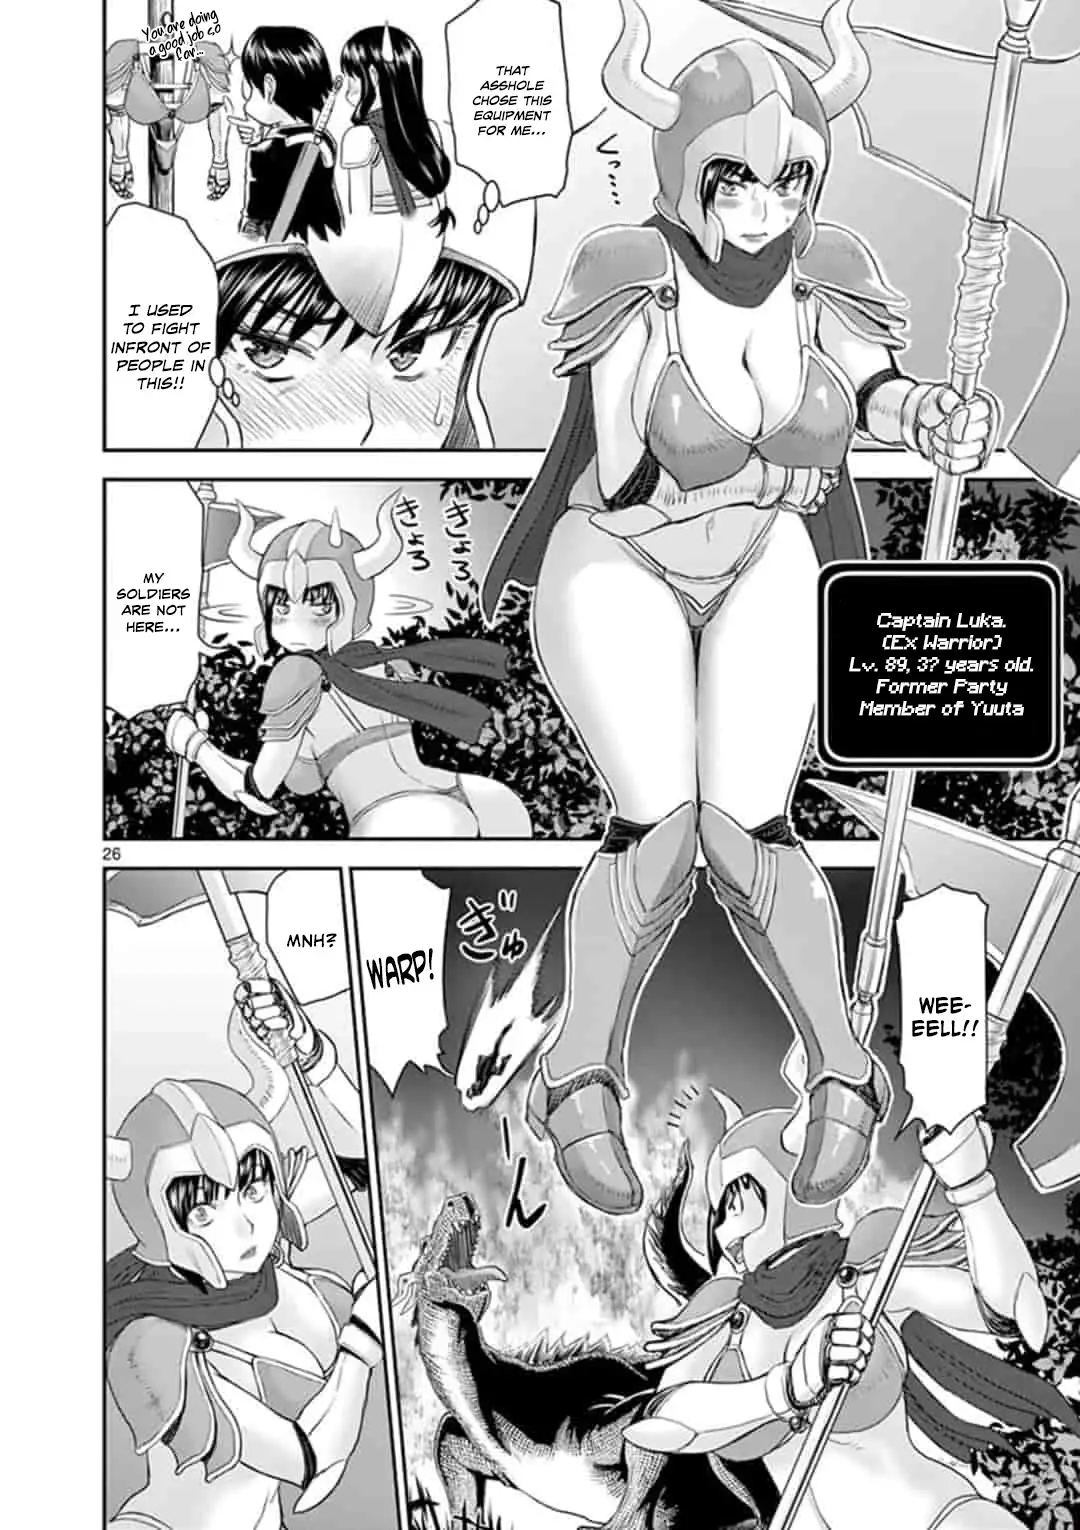 Isekai Affair ~Ten Years After The Demon King's Subjugation, The Married Former Hero And The Female Warrior Who Lost Her Husband ~ - 1 page 26